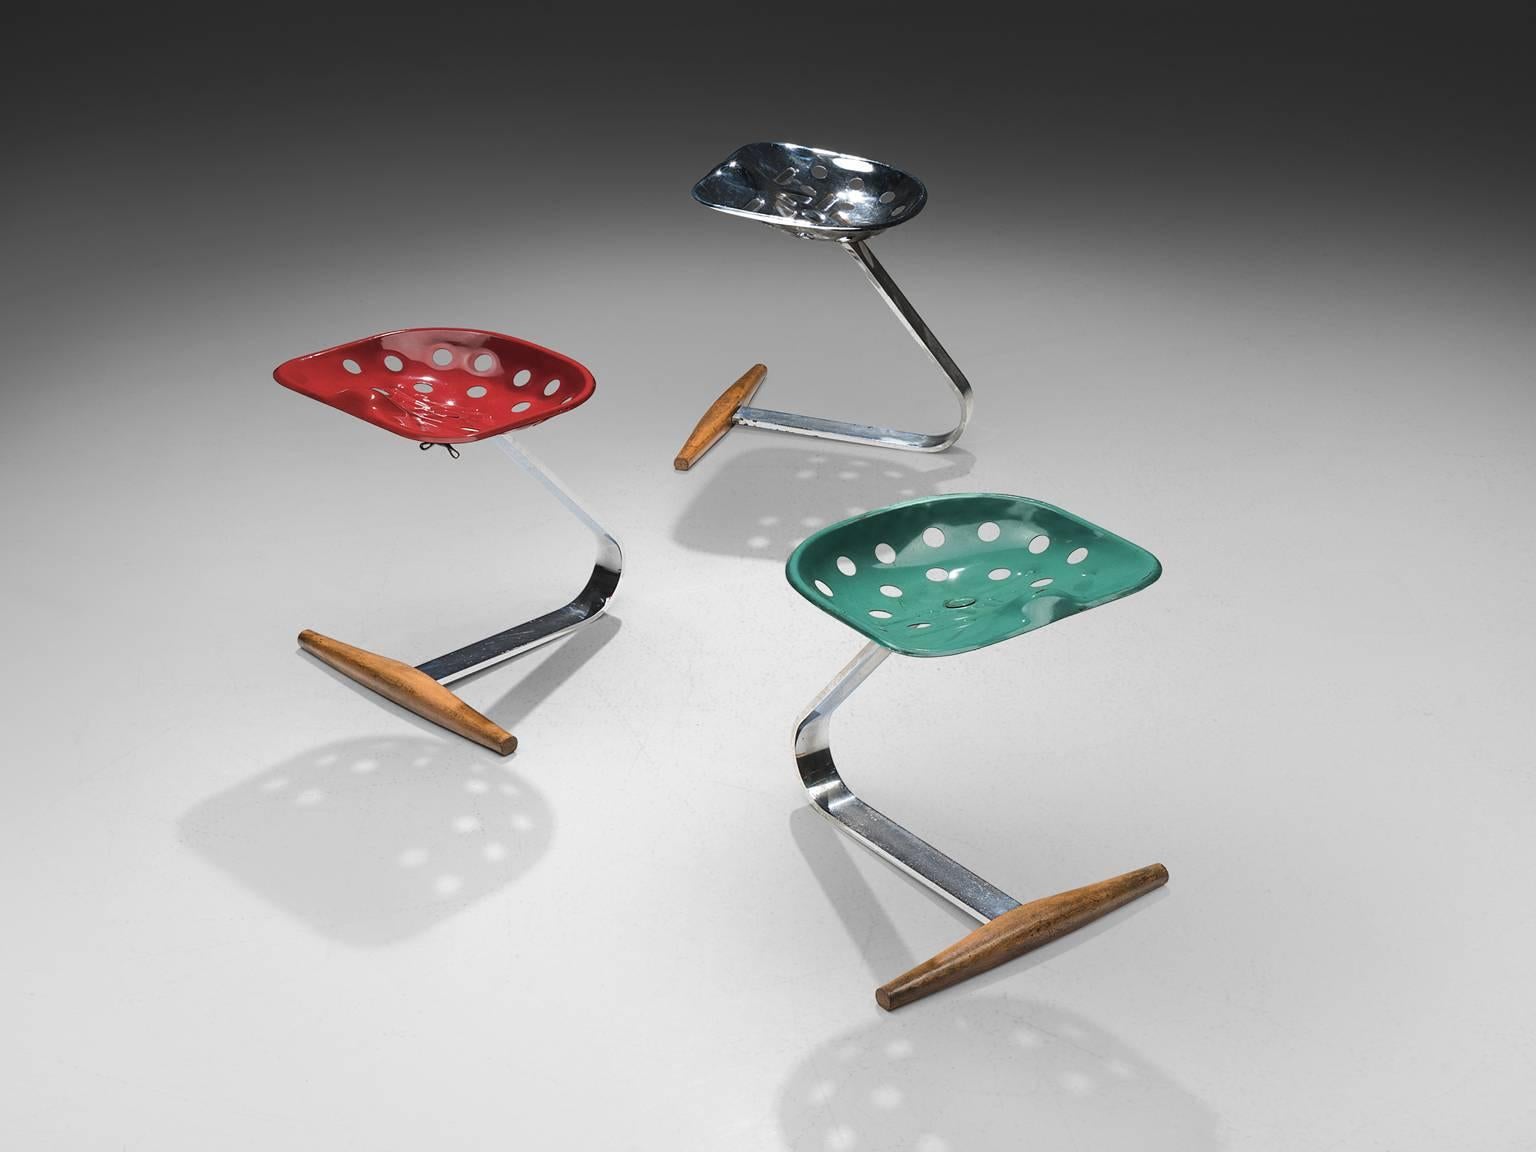 Achille & Pier Giacomo Castiglioni for Zanotta, 'Mezzadro' or 'Tractor' stools, metal, painted red, turquoise and silver metal and wood, Italy, 1957.

These three Mezzadro stools are executed in a in light blue-green, silver and red. The bent